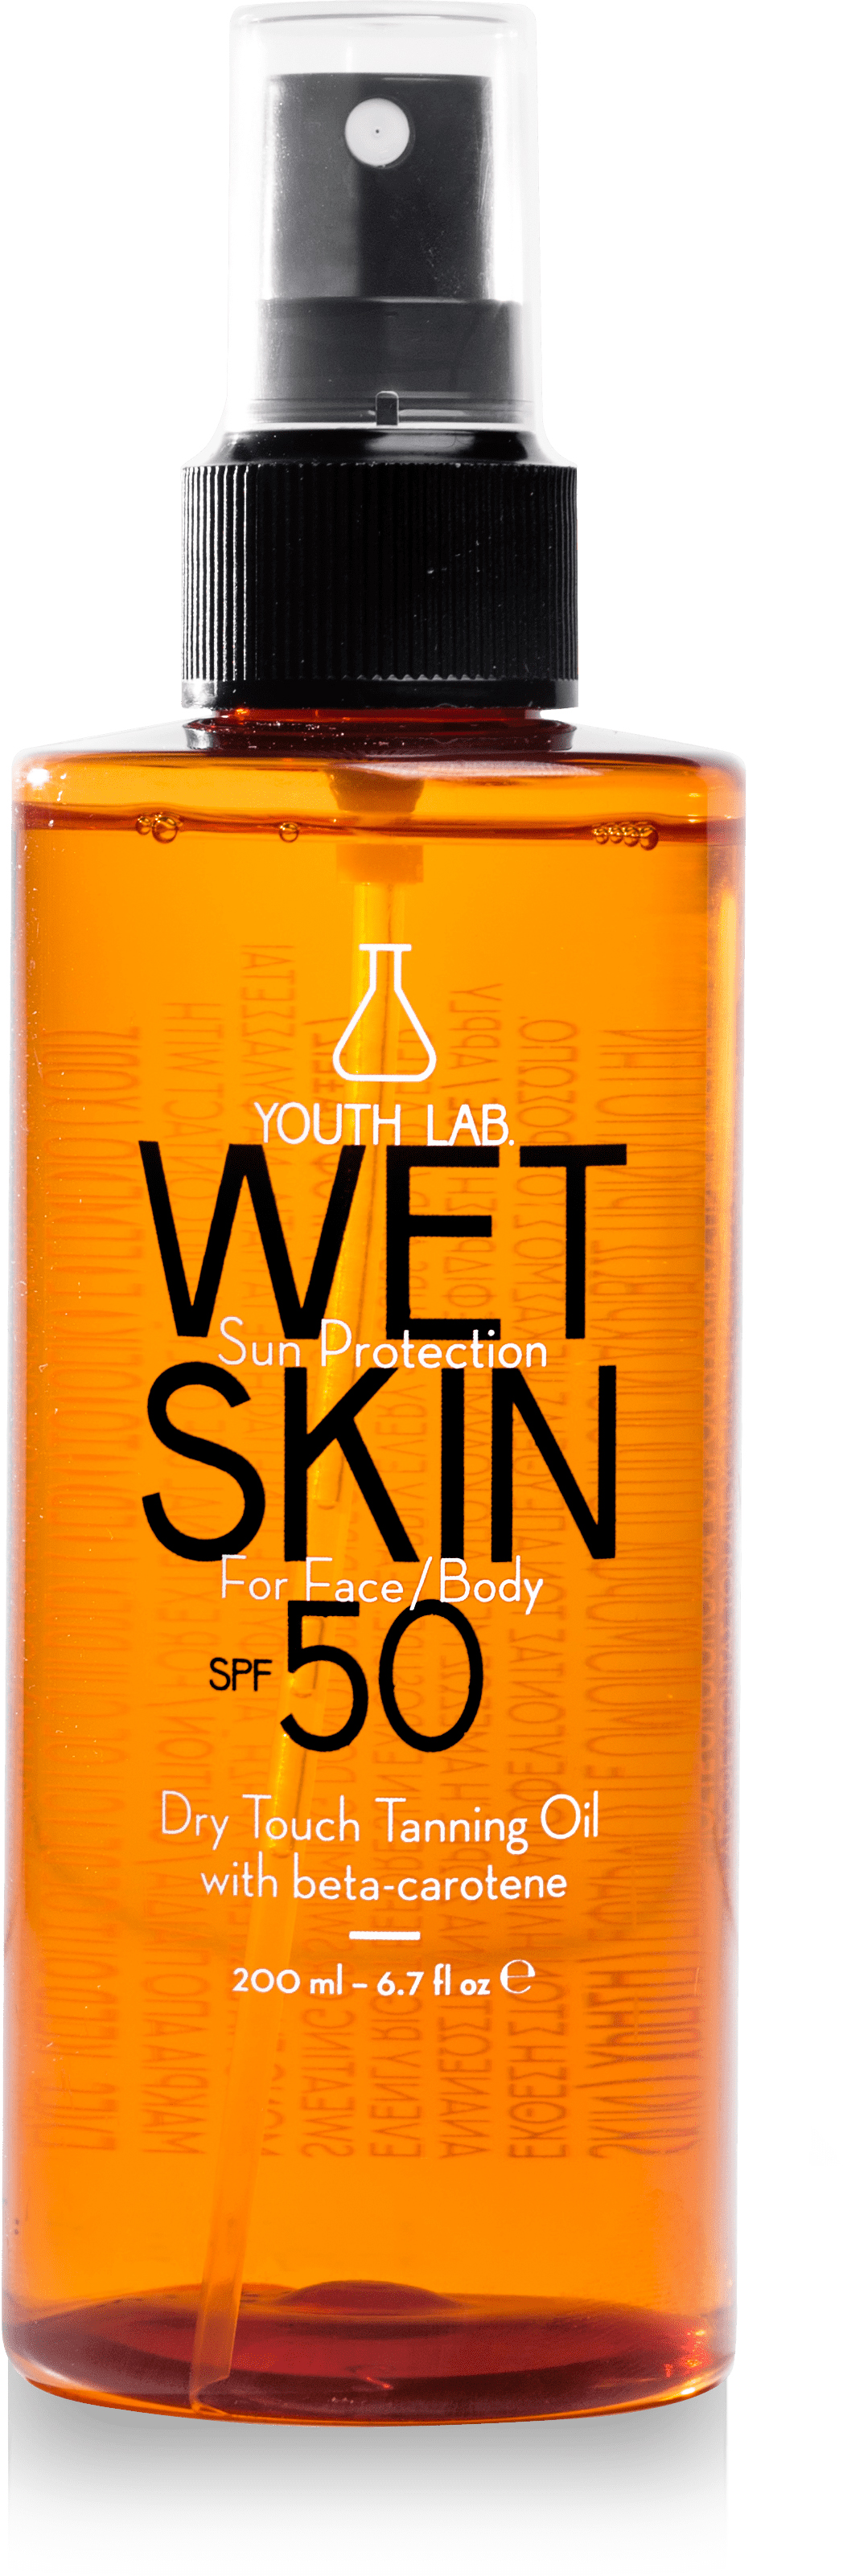 Youth Lab Wet Skin Sun Protection Spf 50 Waterproof Oilspray For Face And  Body 200 ml